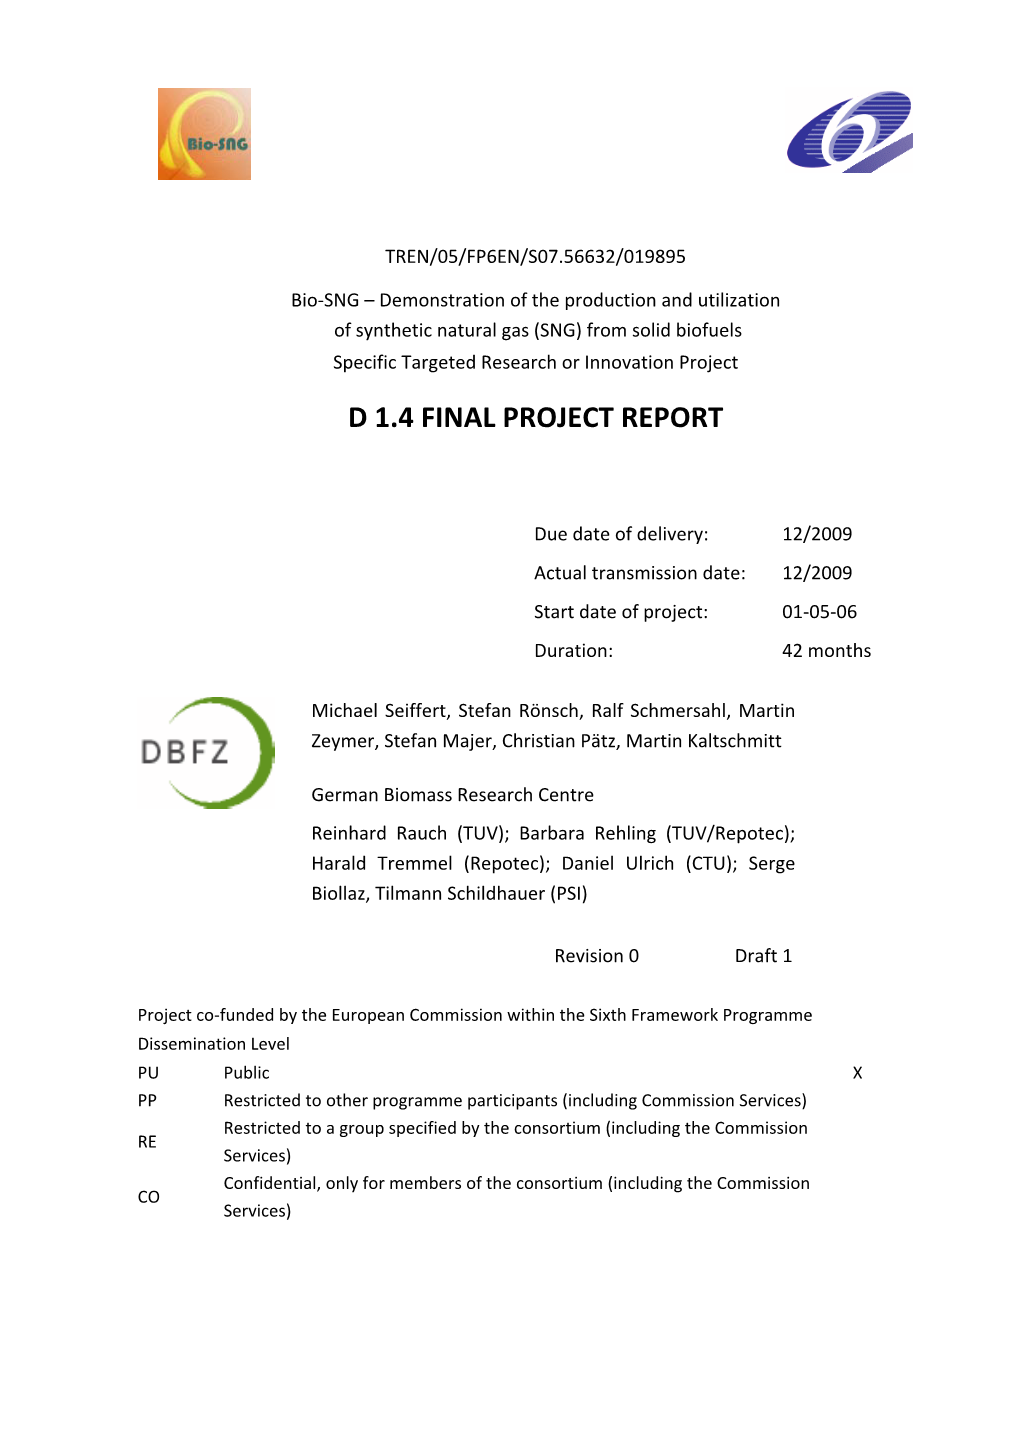 Final Project Report Draft